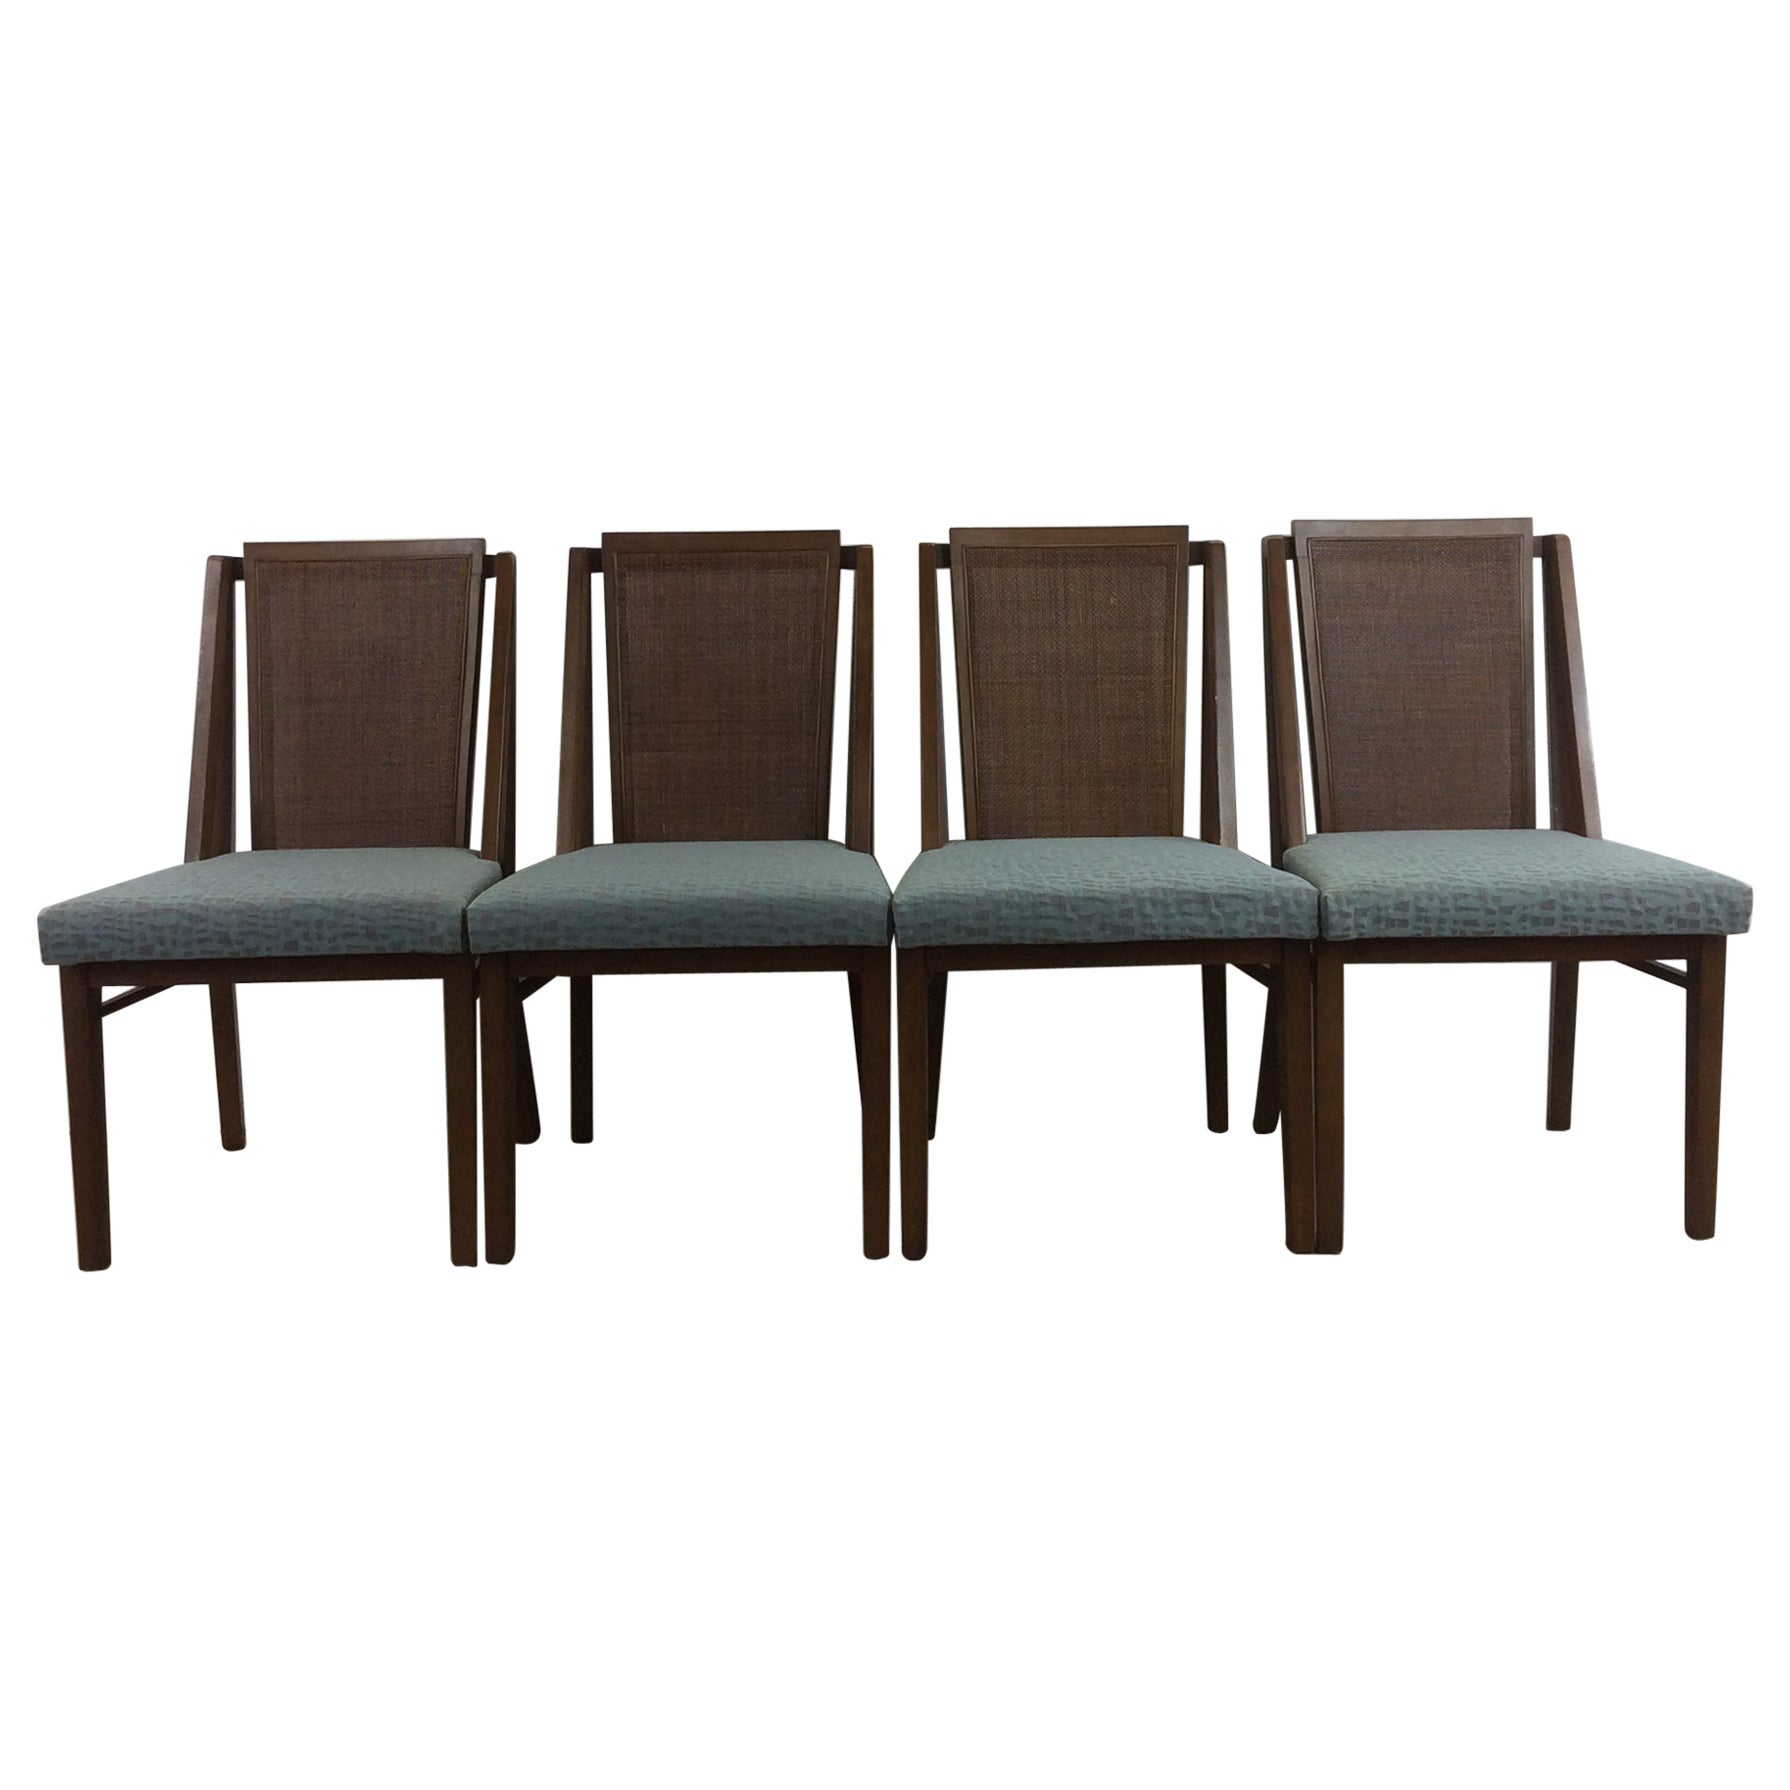 Set of 4 Mid-Century Modern Dining Room Chairs by Drexel For Sale